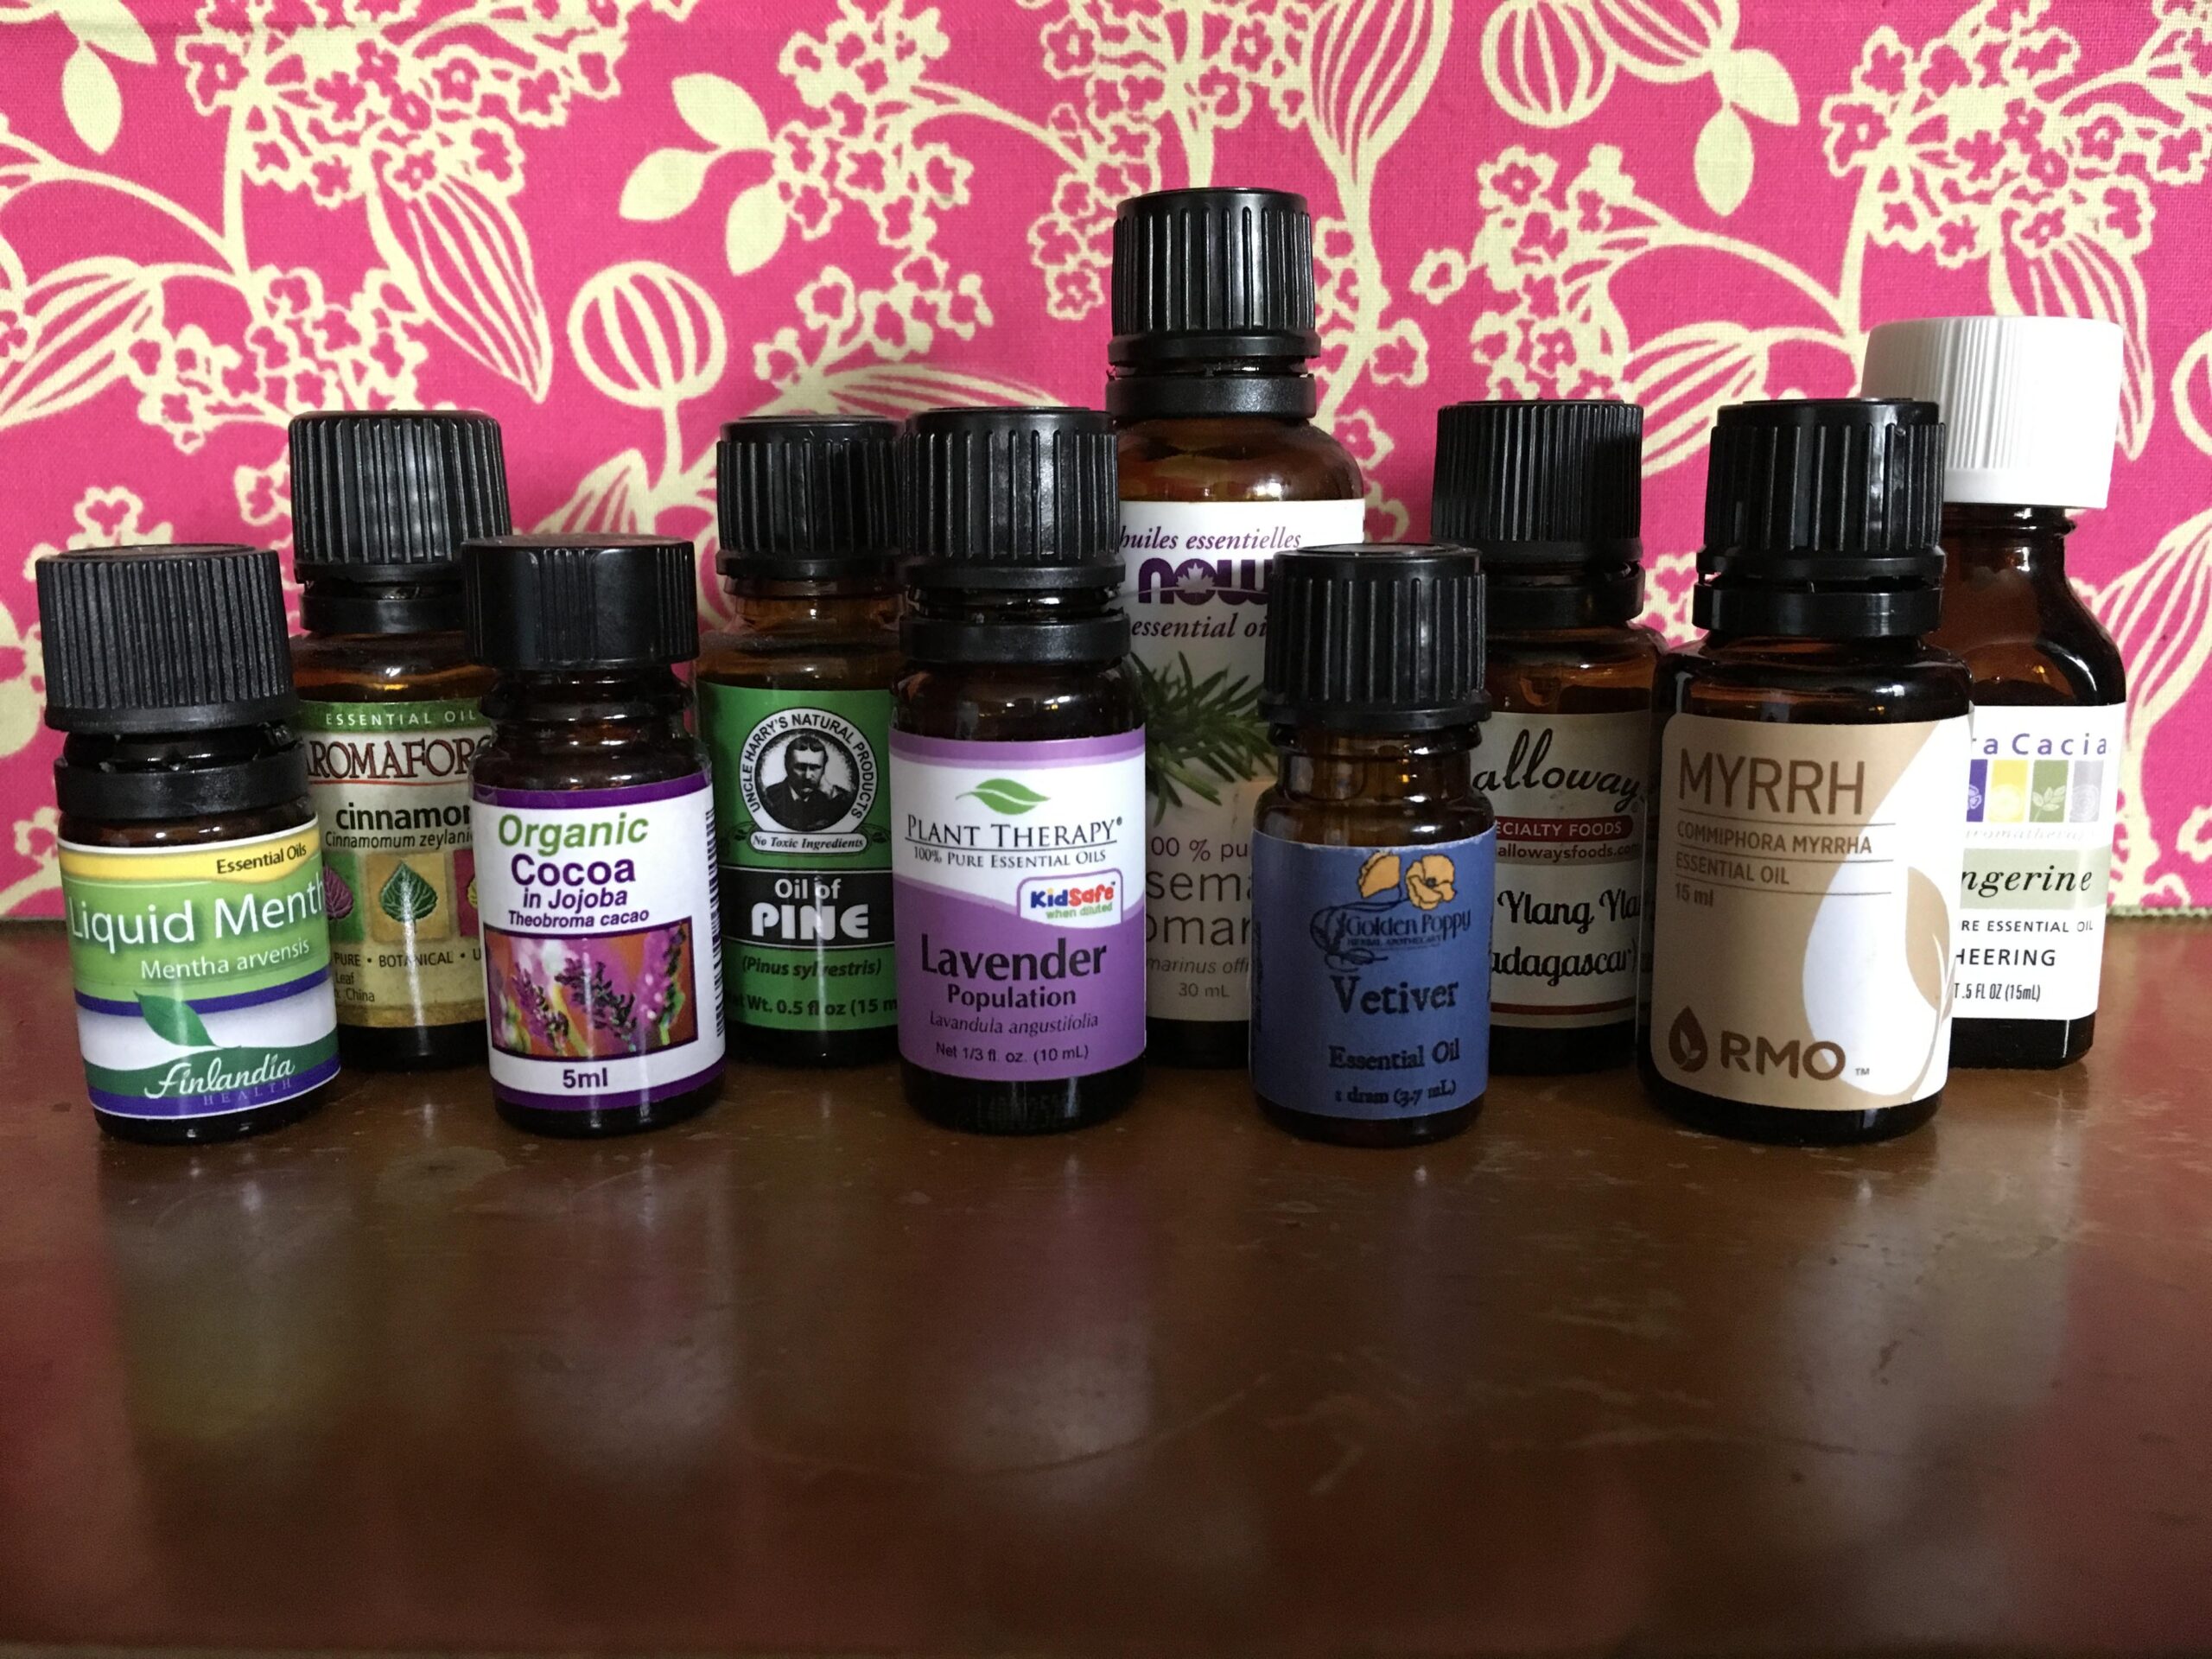 How do you choose a brand of essential oil that is safe? We answer all your questions and provide a thoughtful checklist to evaluate every new purchase so you're happy with every single brand you buy.